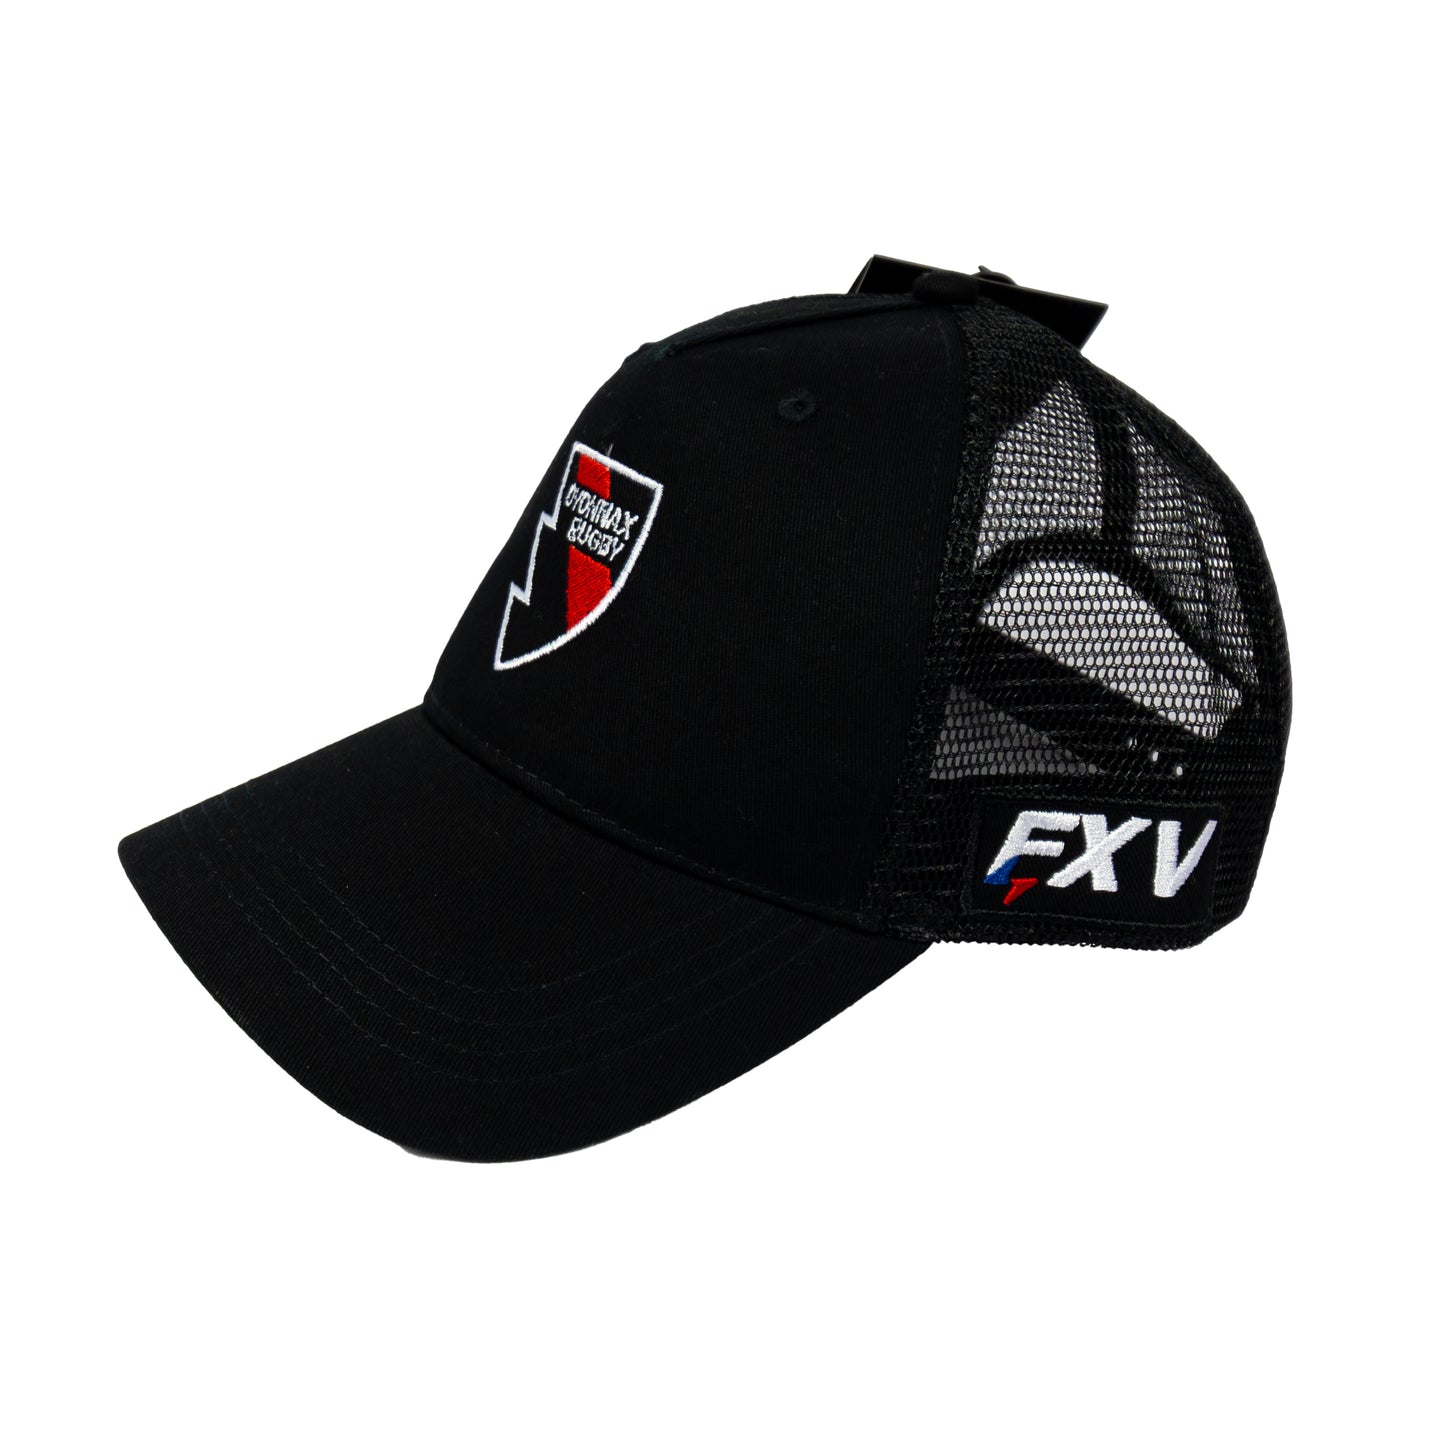 Casquette Mesh Force XV Oyonnax Rugby